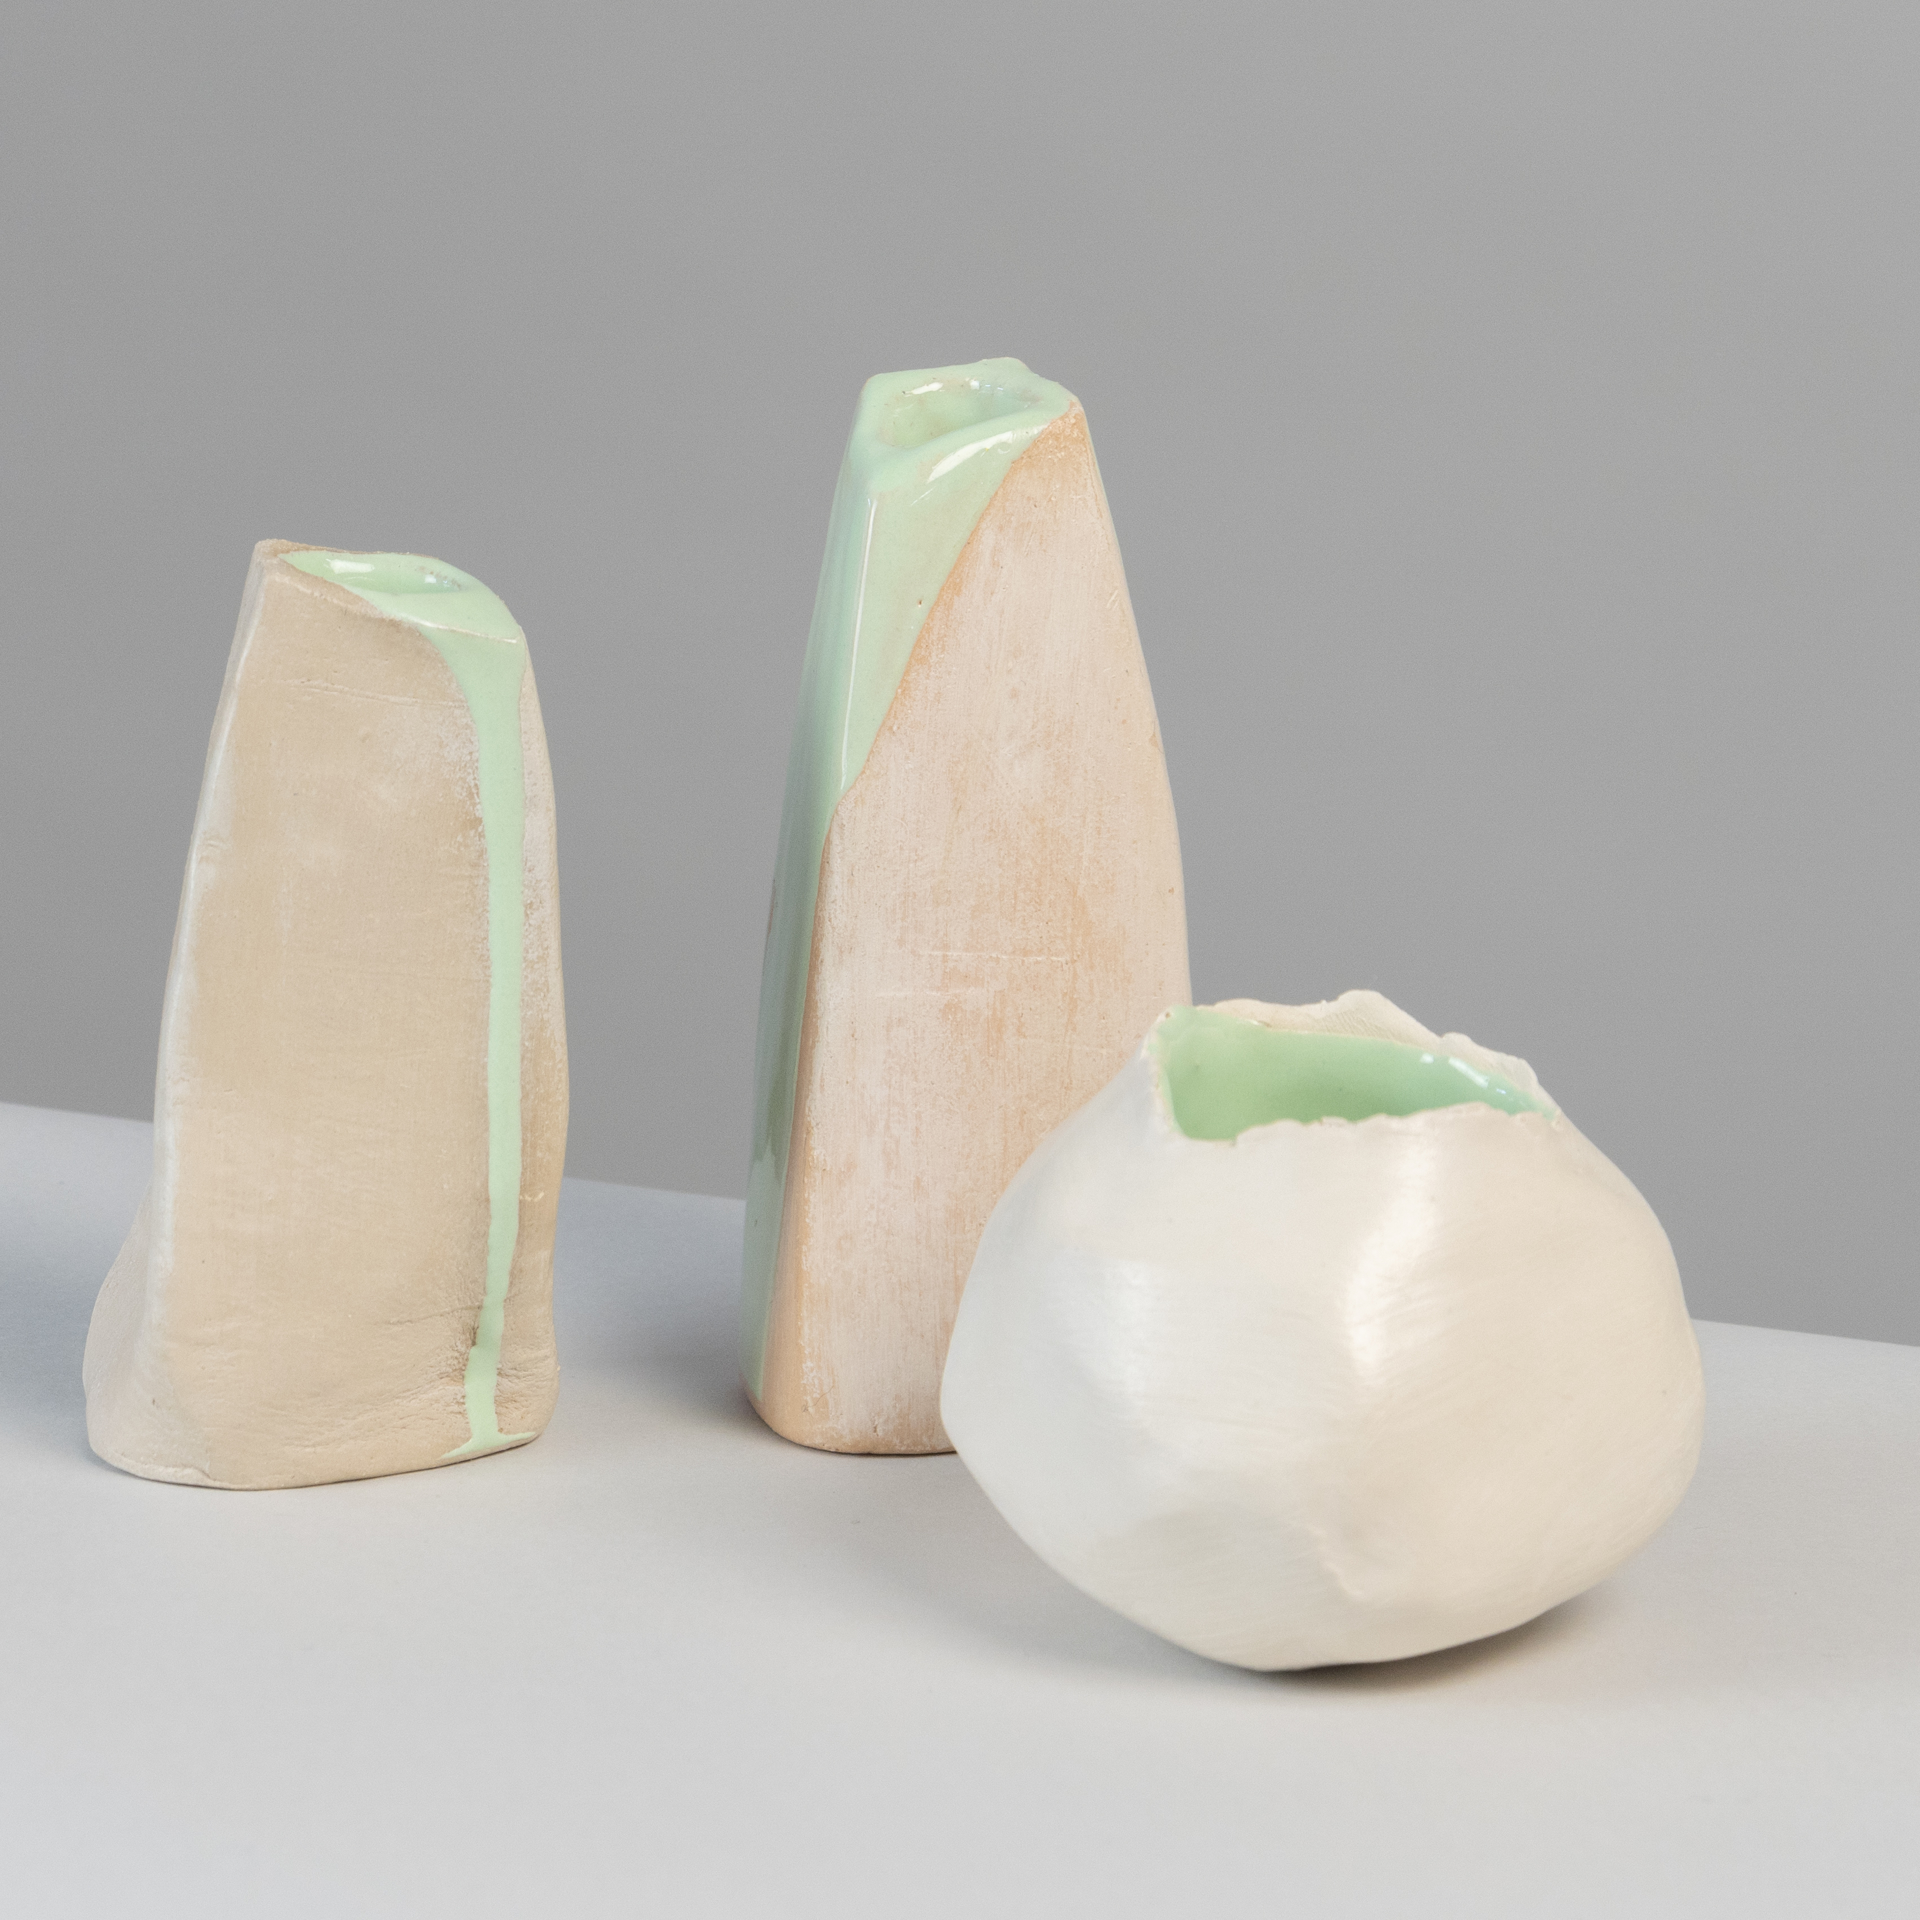 "Springtime" 10 small vases by Claire de Lavallee